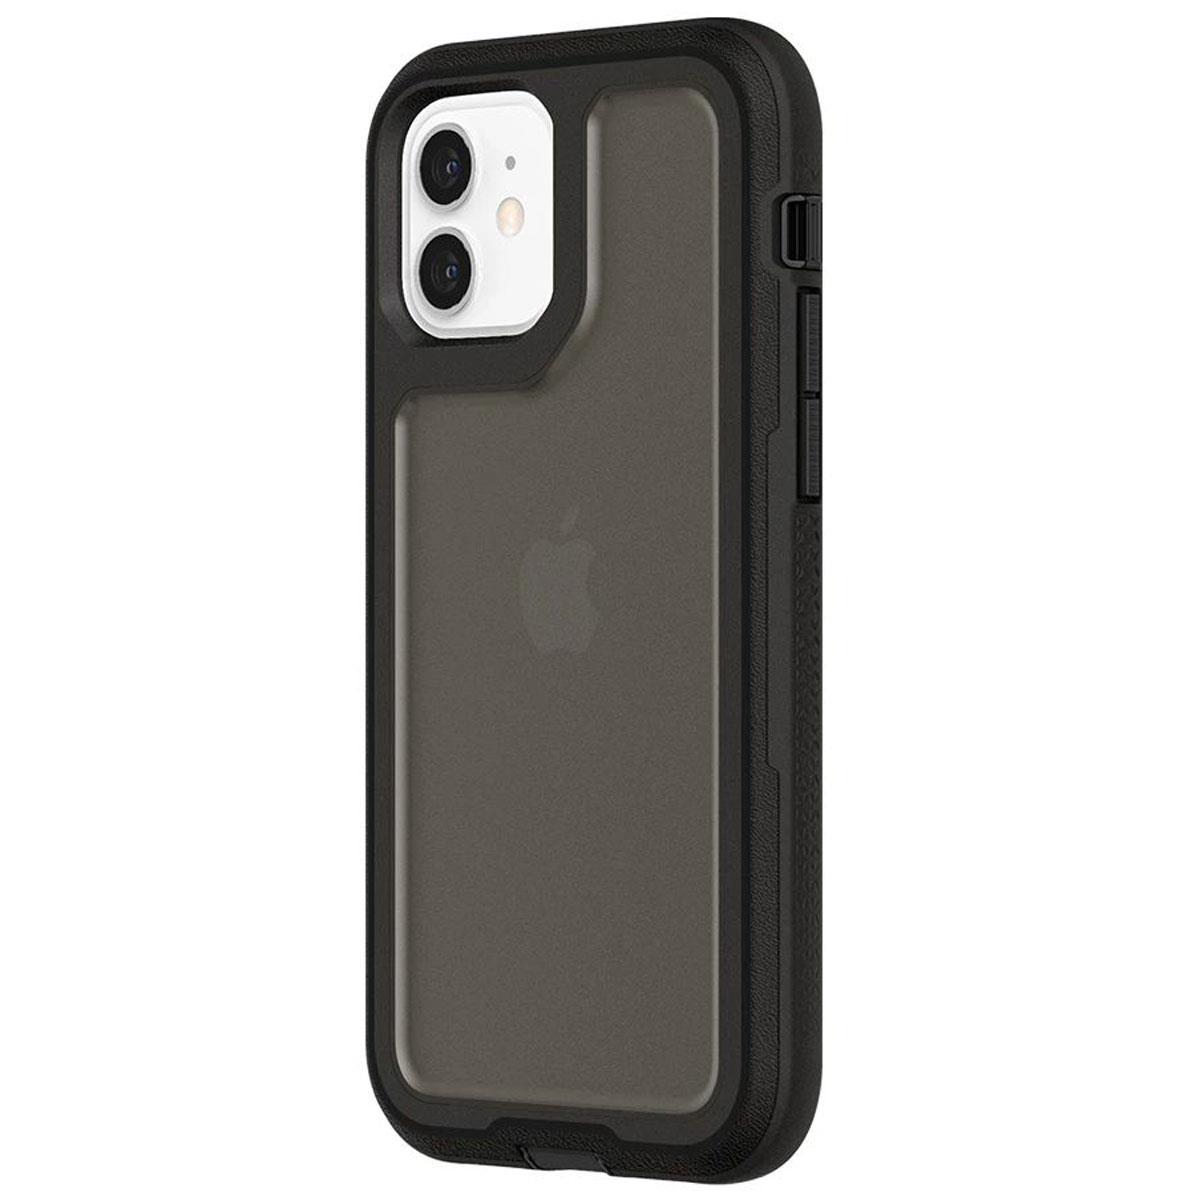 Image of Griffin Technology Survivor Extreme Case for iPhone12/12 Pro